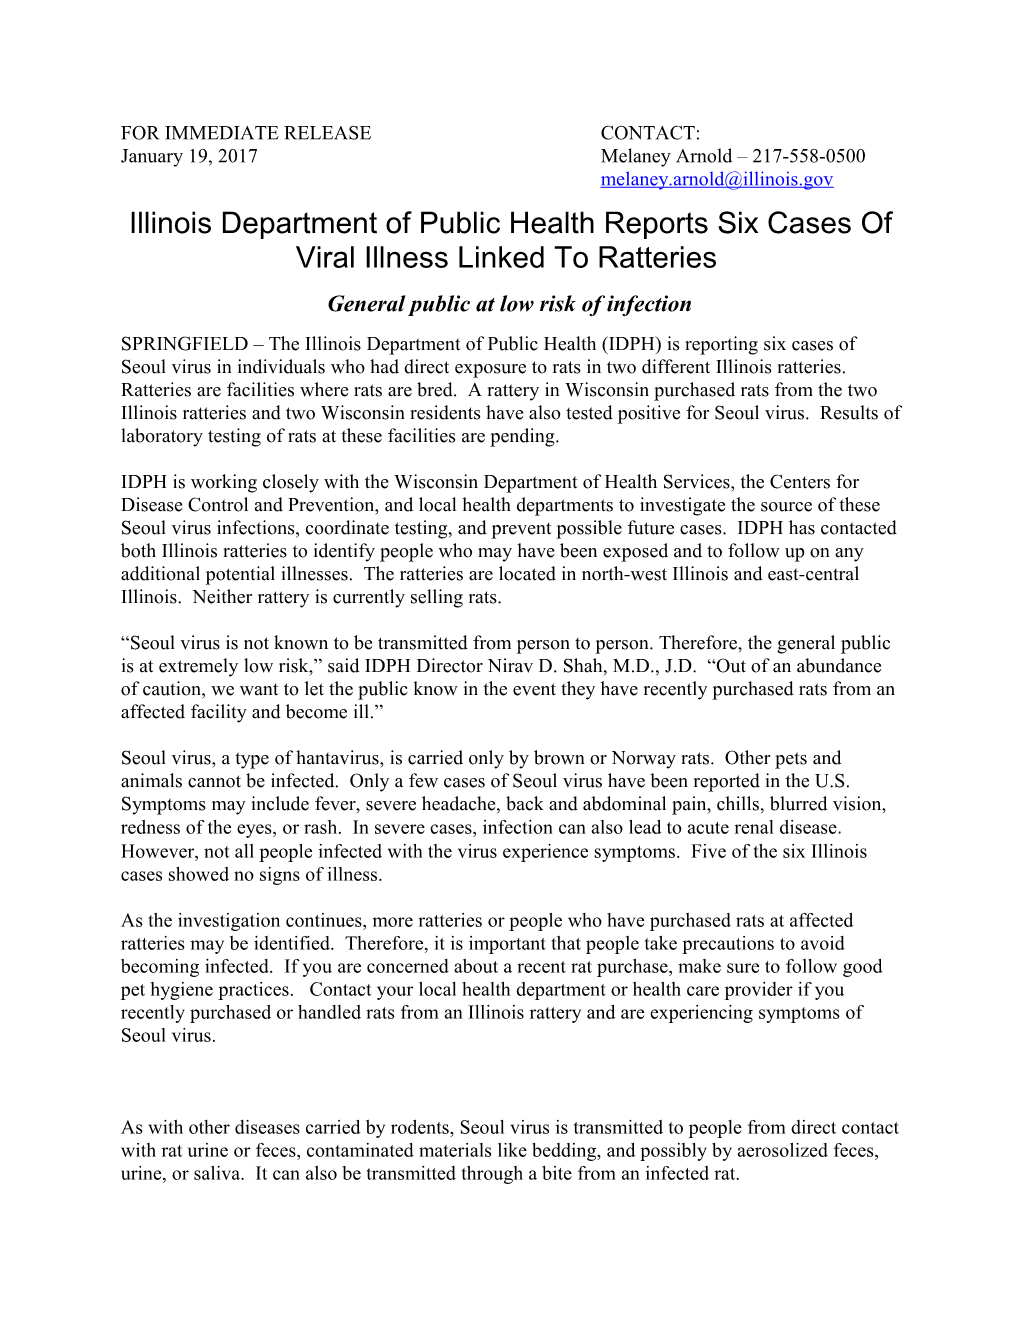 Illinois Department of Public Health Reports Six Cases of Viral Illness Linked to Ratteries